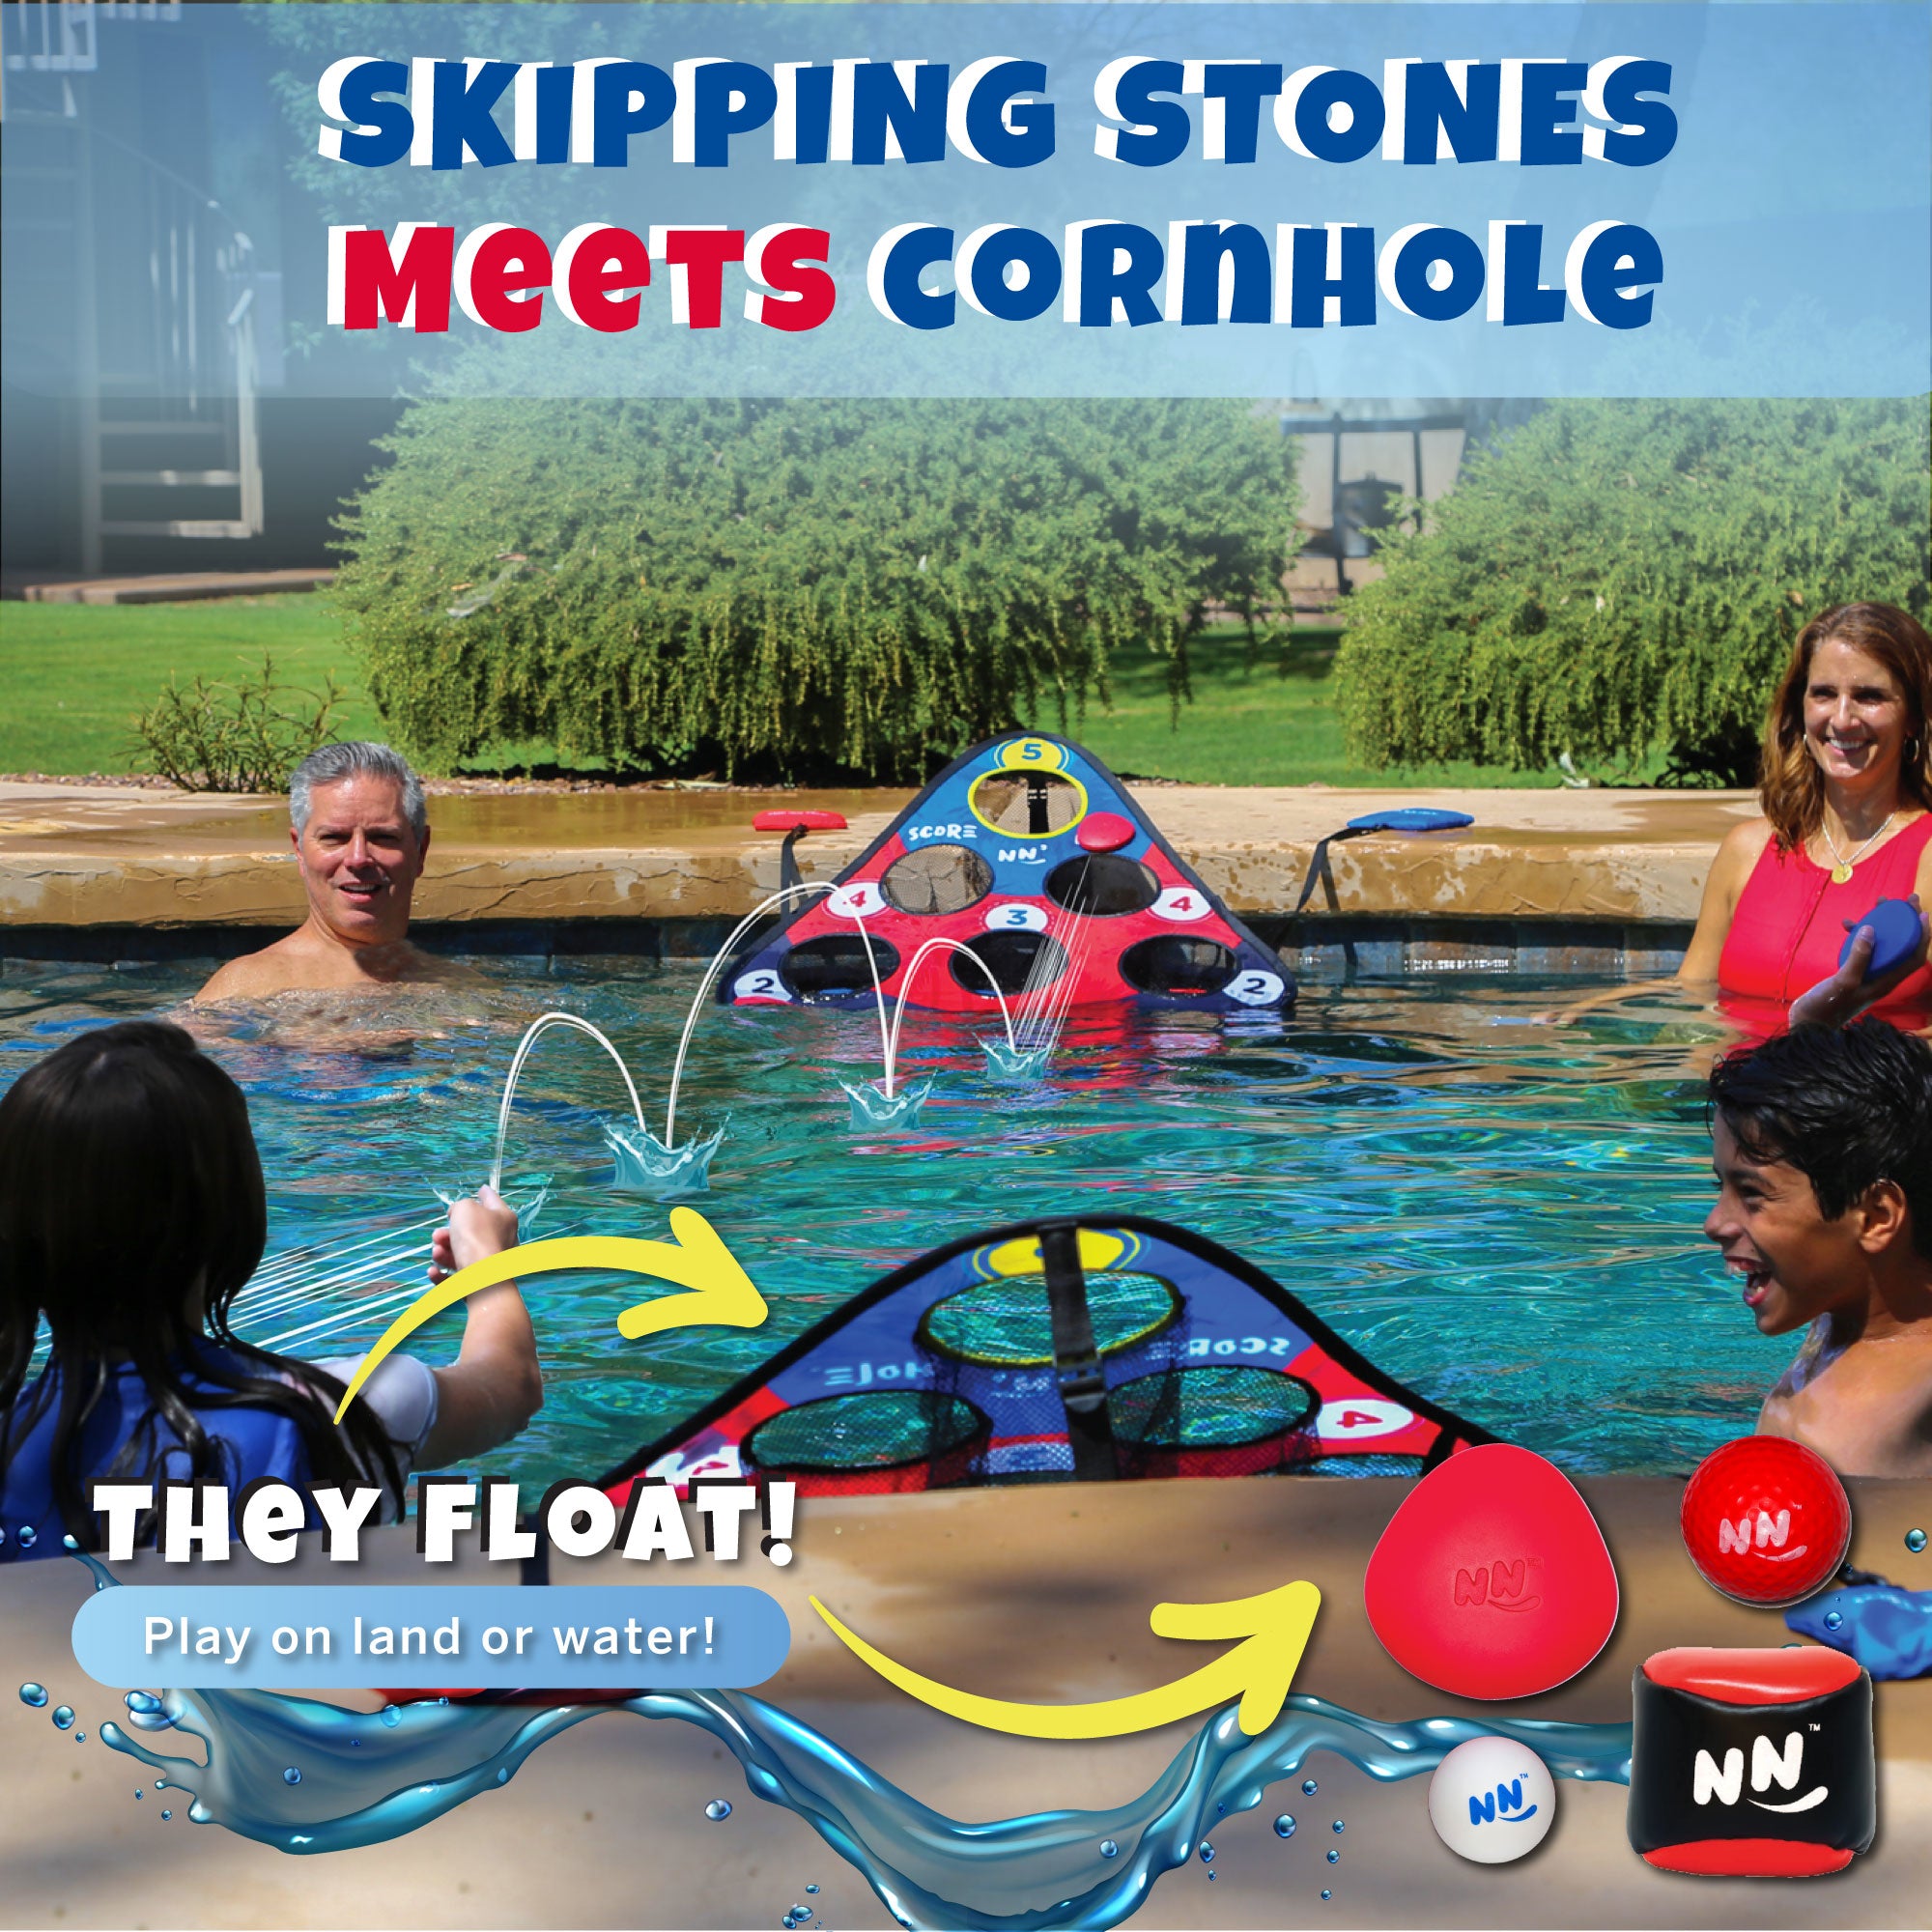 SCORE NN' HOLE ALL-IN-1 GAME SET | Includes stone skipping, golf, cornhole, skeeball, beer pong, and more!